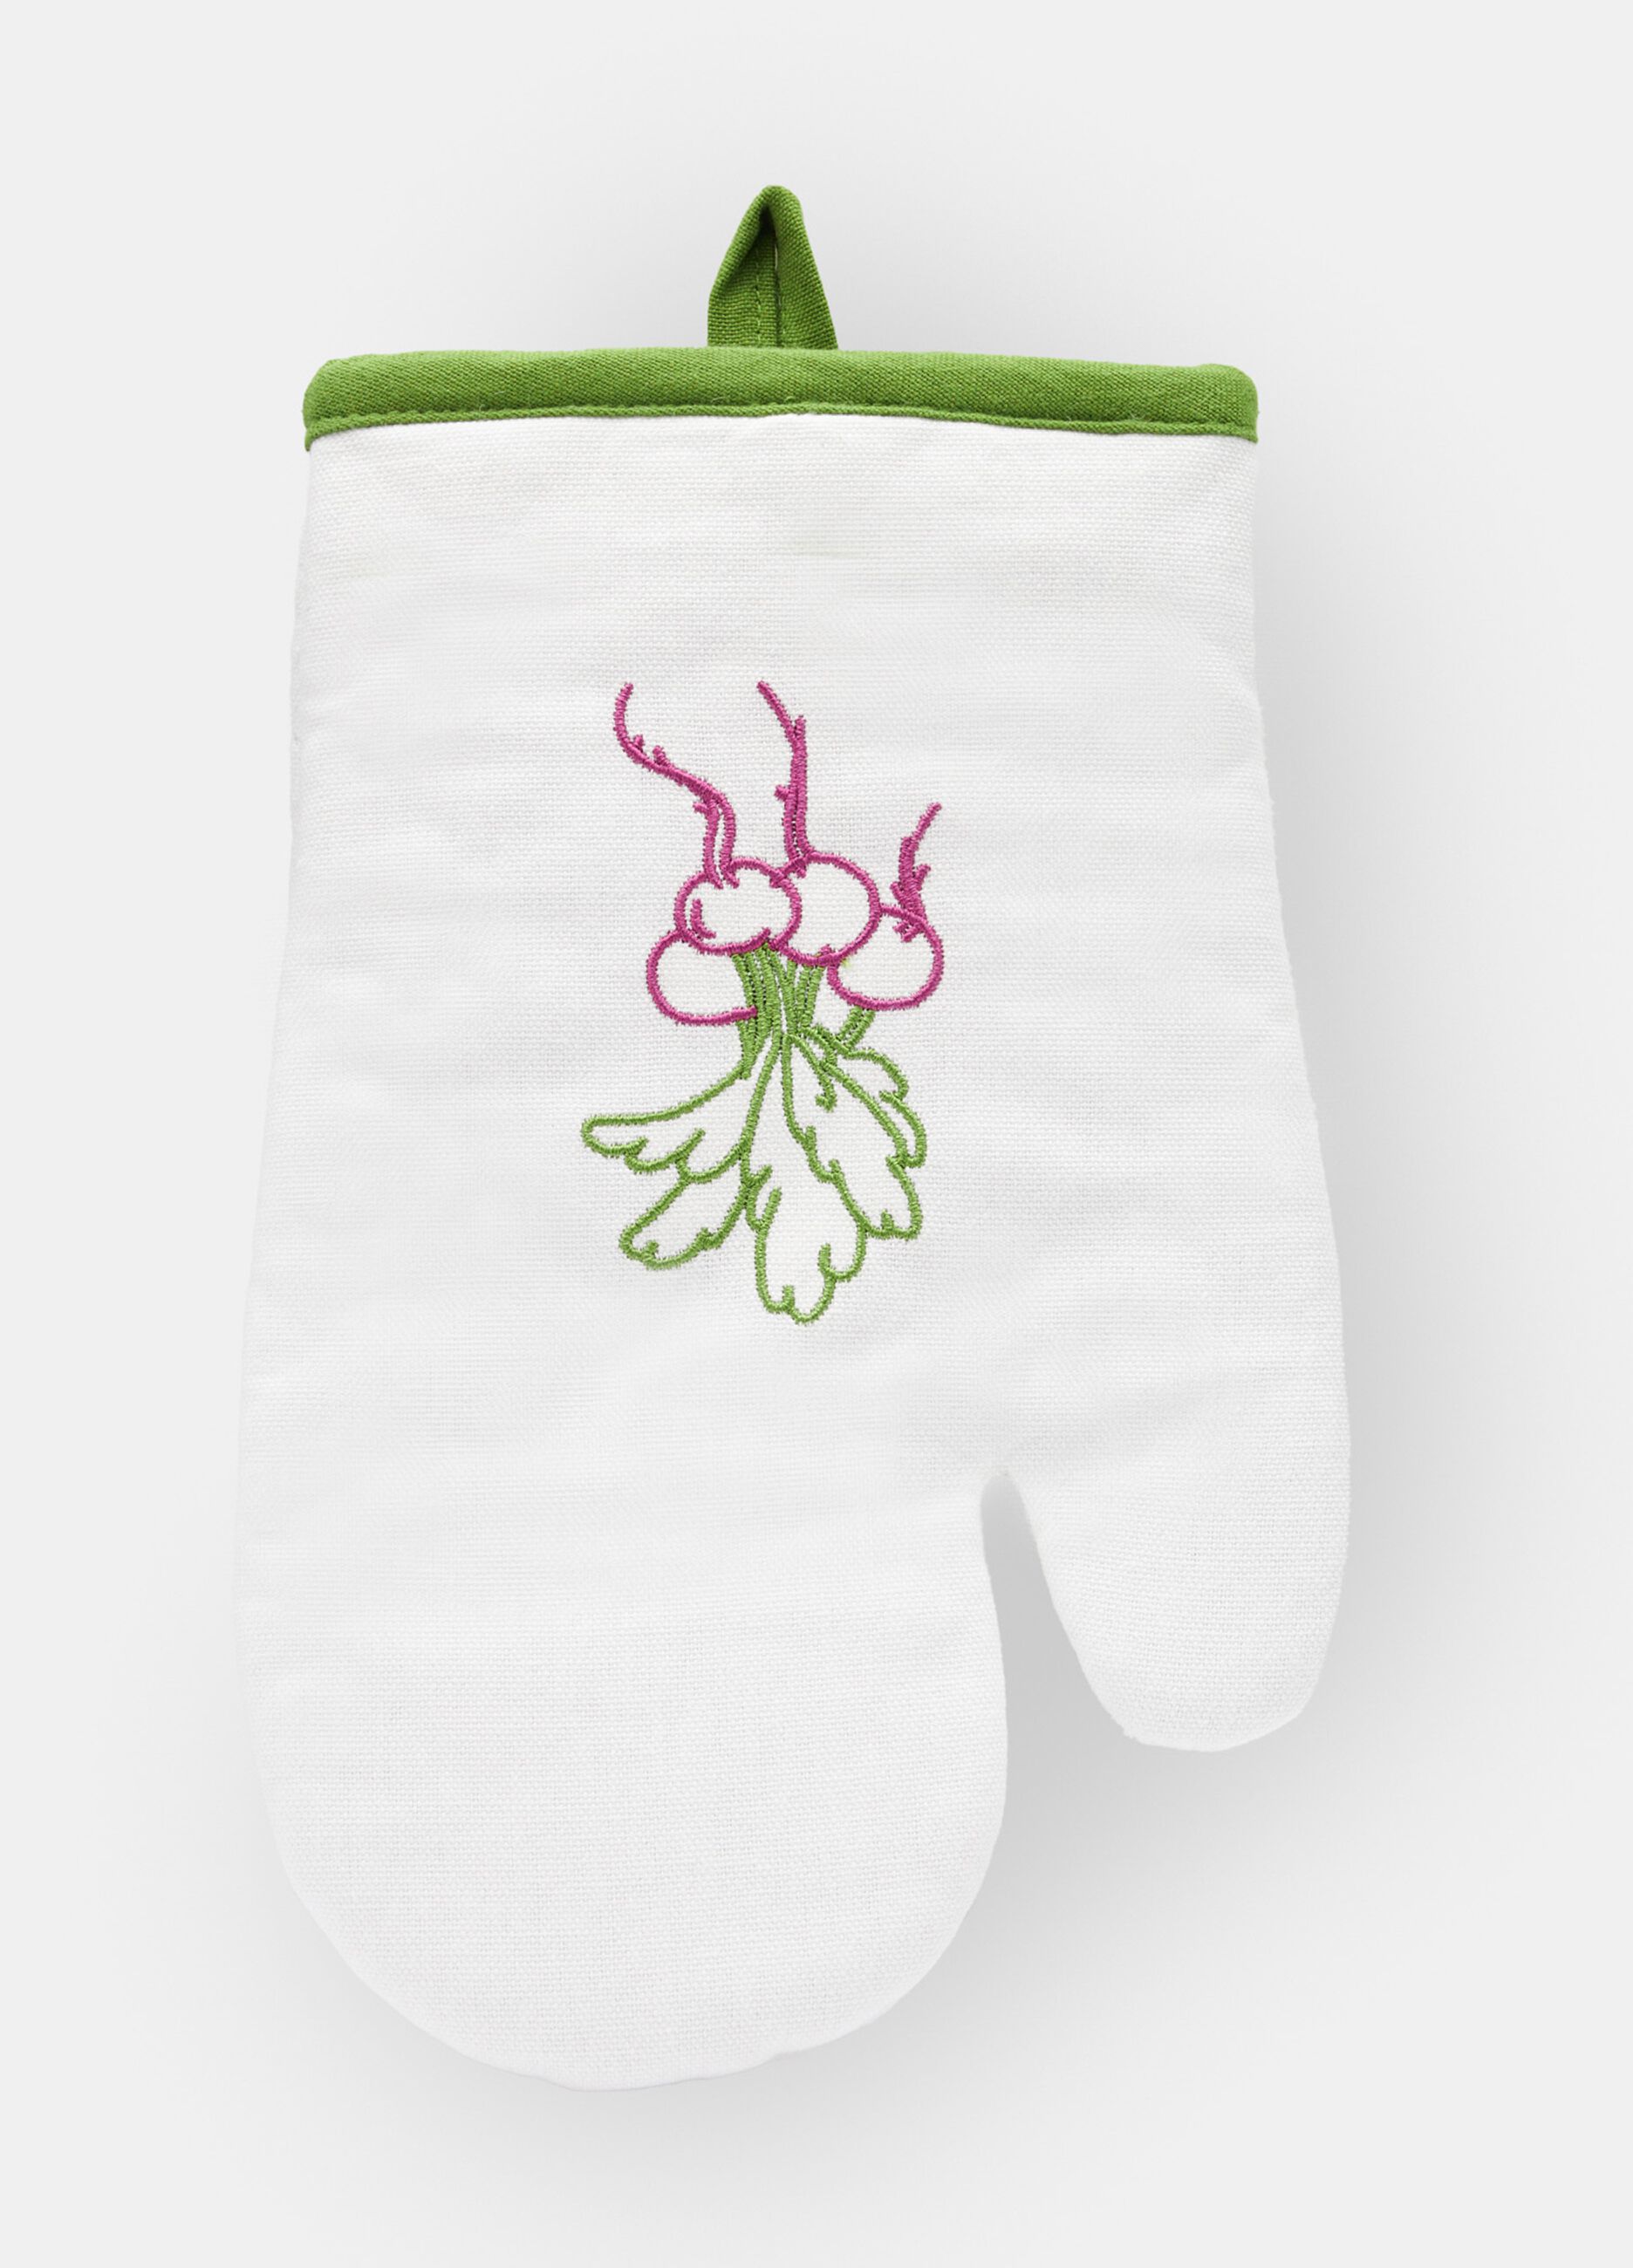 Cotton glove with embroidery